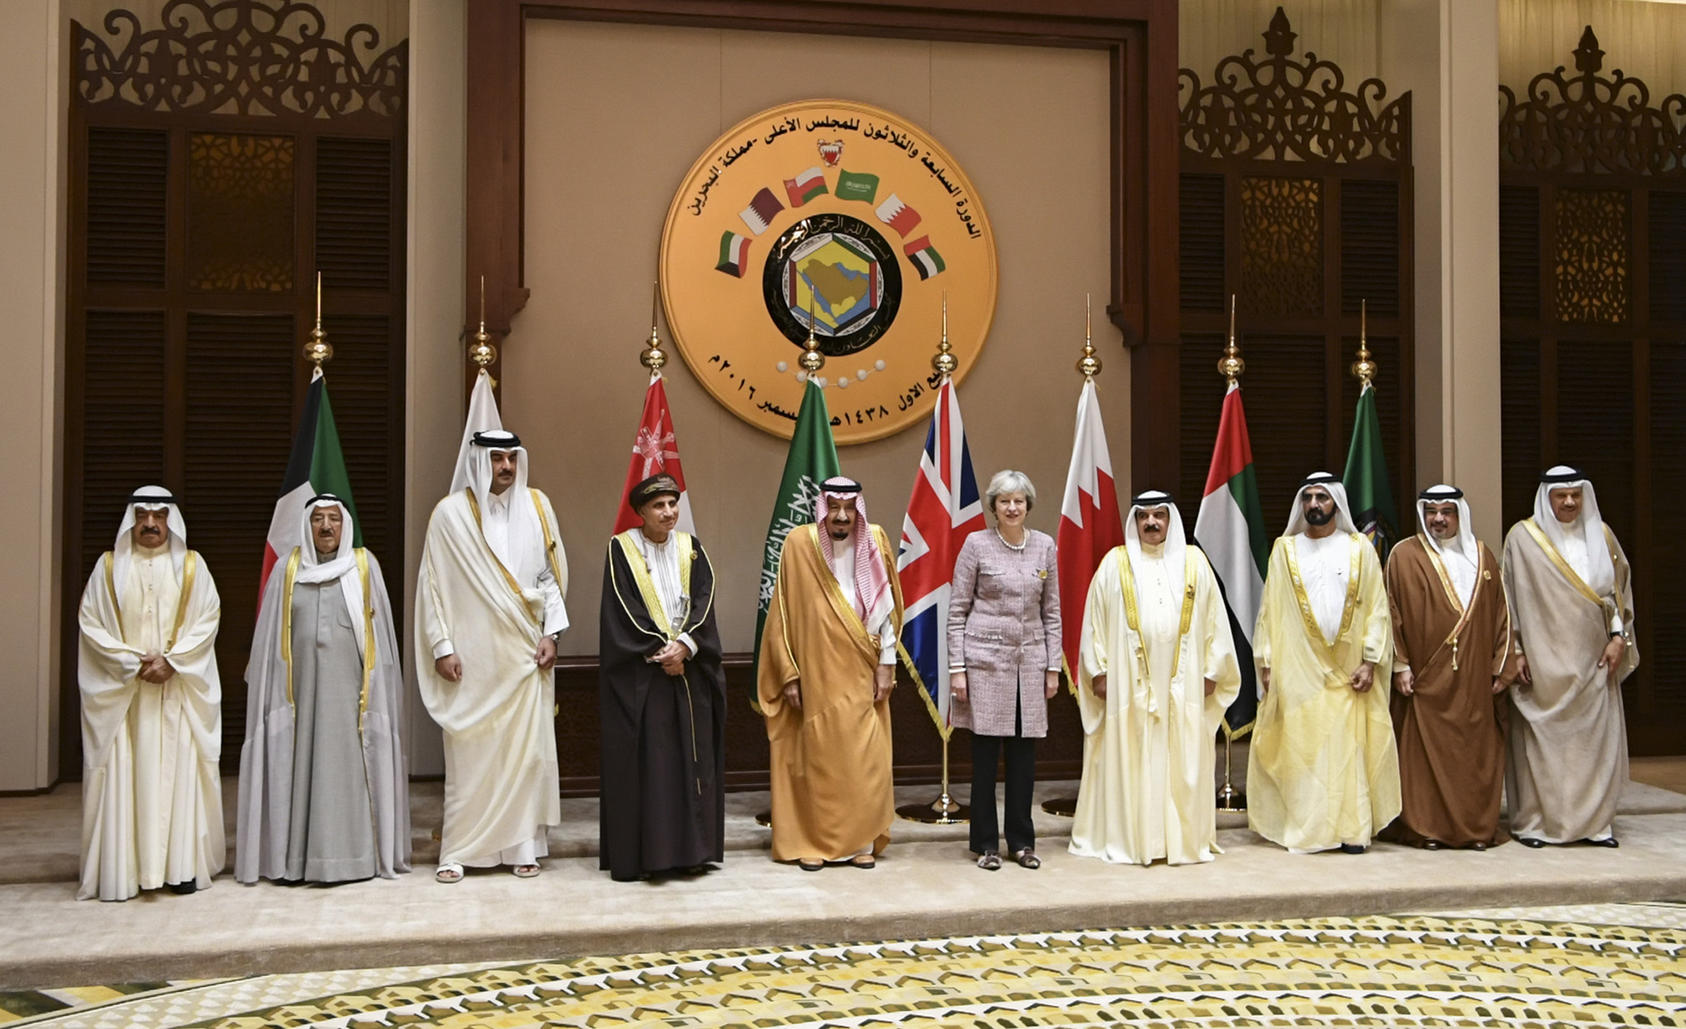 Leaders of the Gulf Cooperation Council (GCC) and former UK Prime Minister Theresa May at a 2016 GCC summit in Bahrain. (Tom Evans/Crown Copyright)